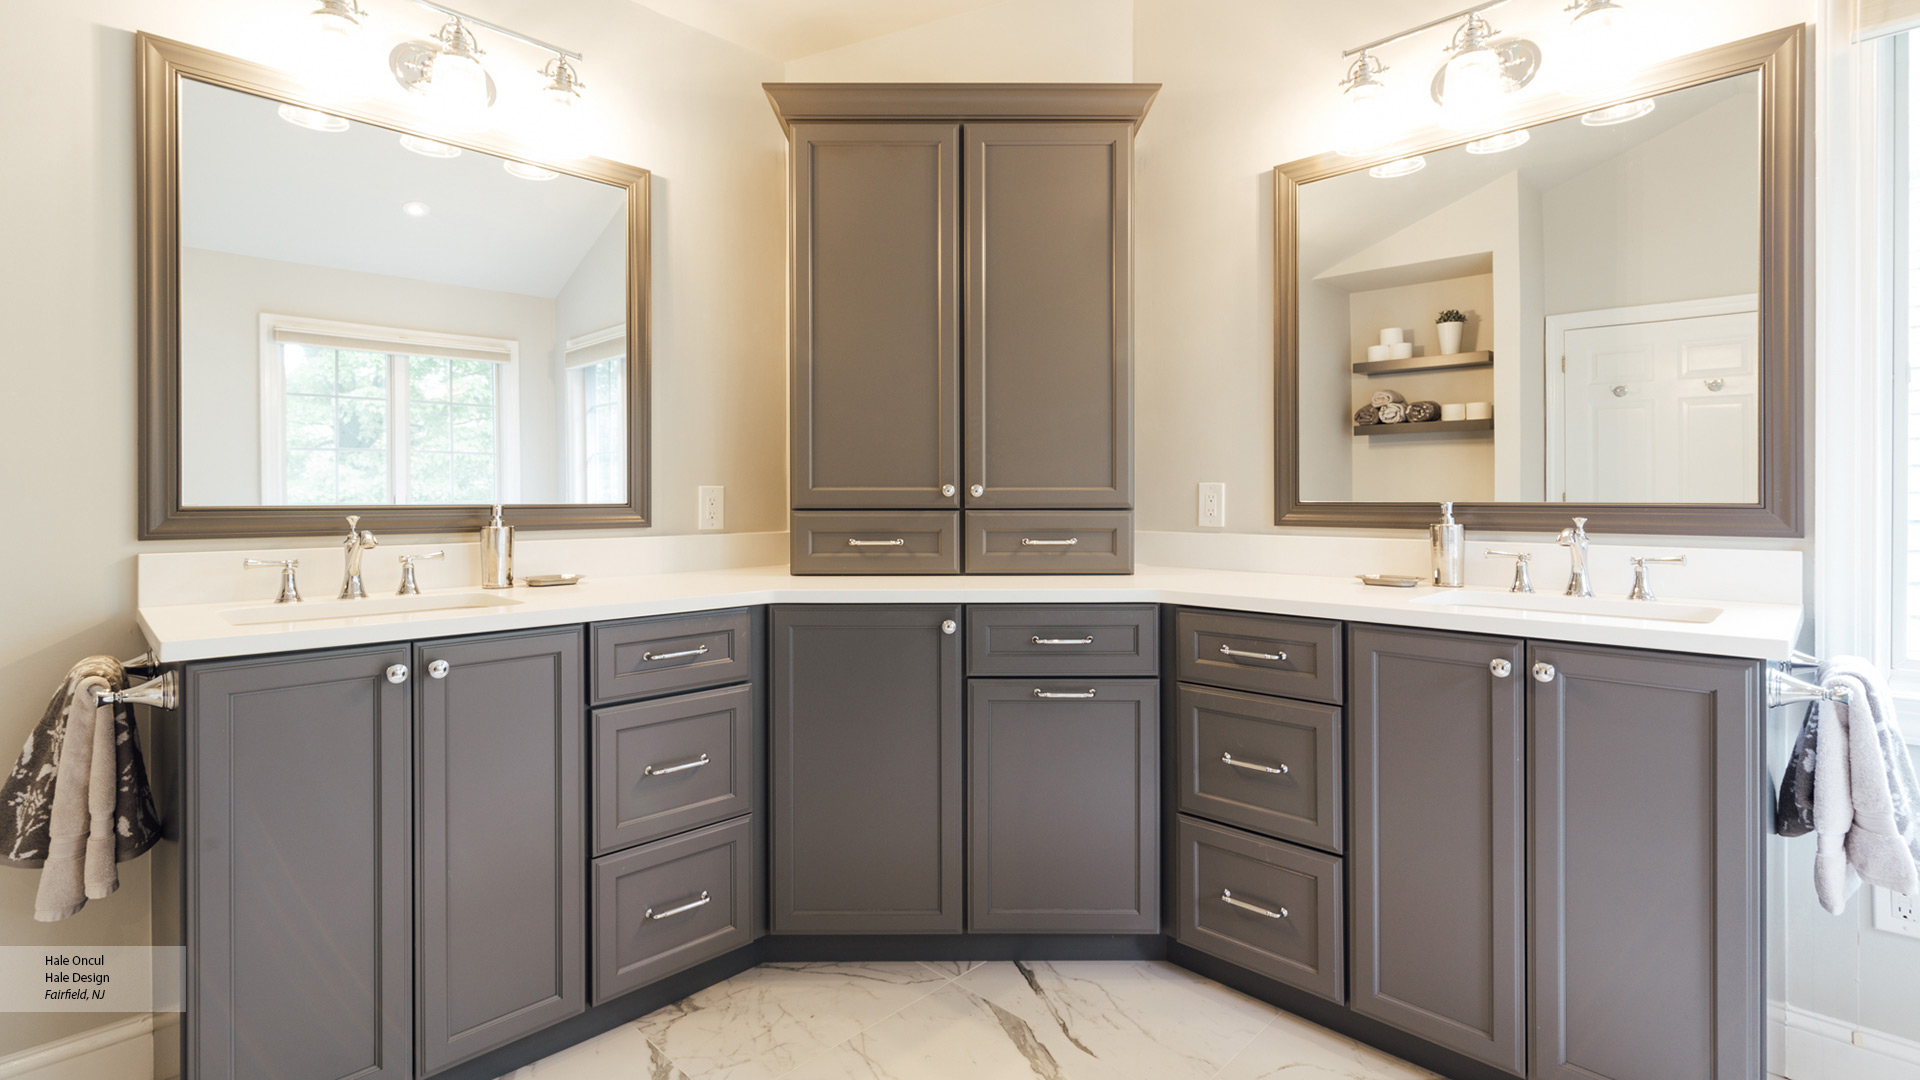 Best Collection of 72+ Exquisite Can You Use Kitchen Cabinet Bathroom Vanity With Many New Styles